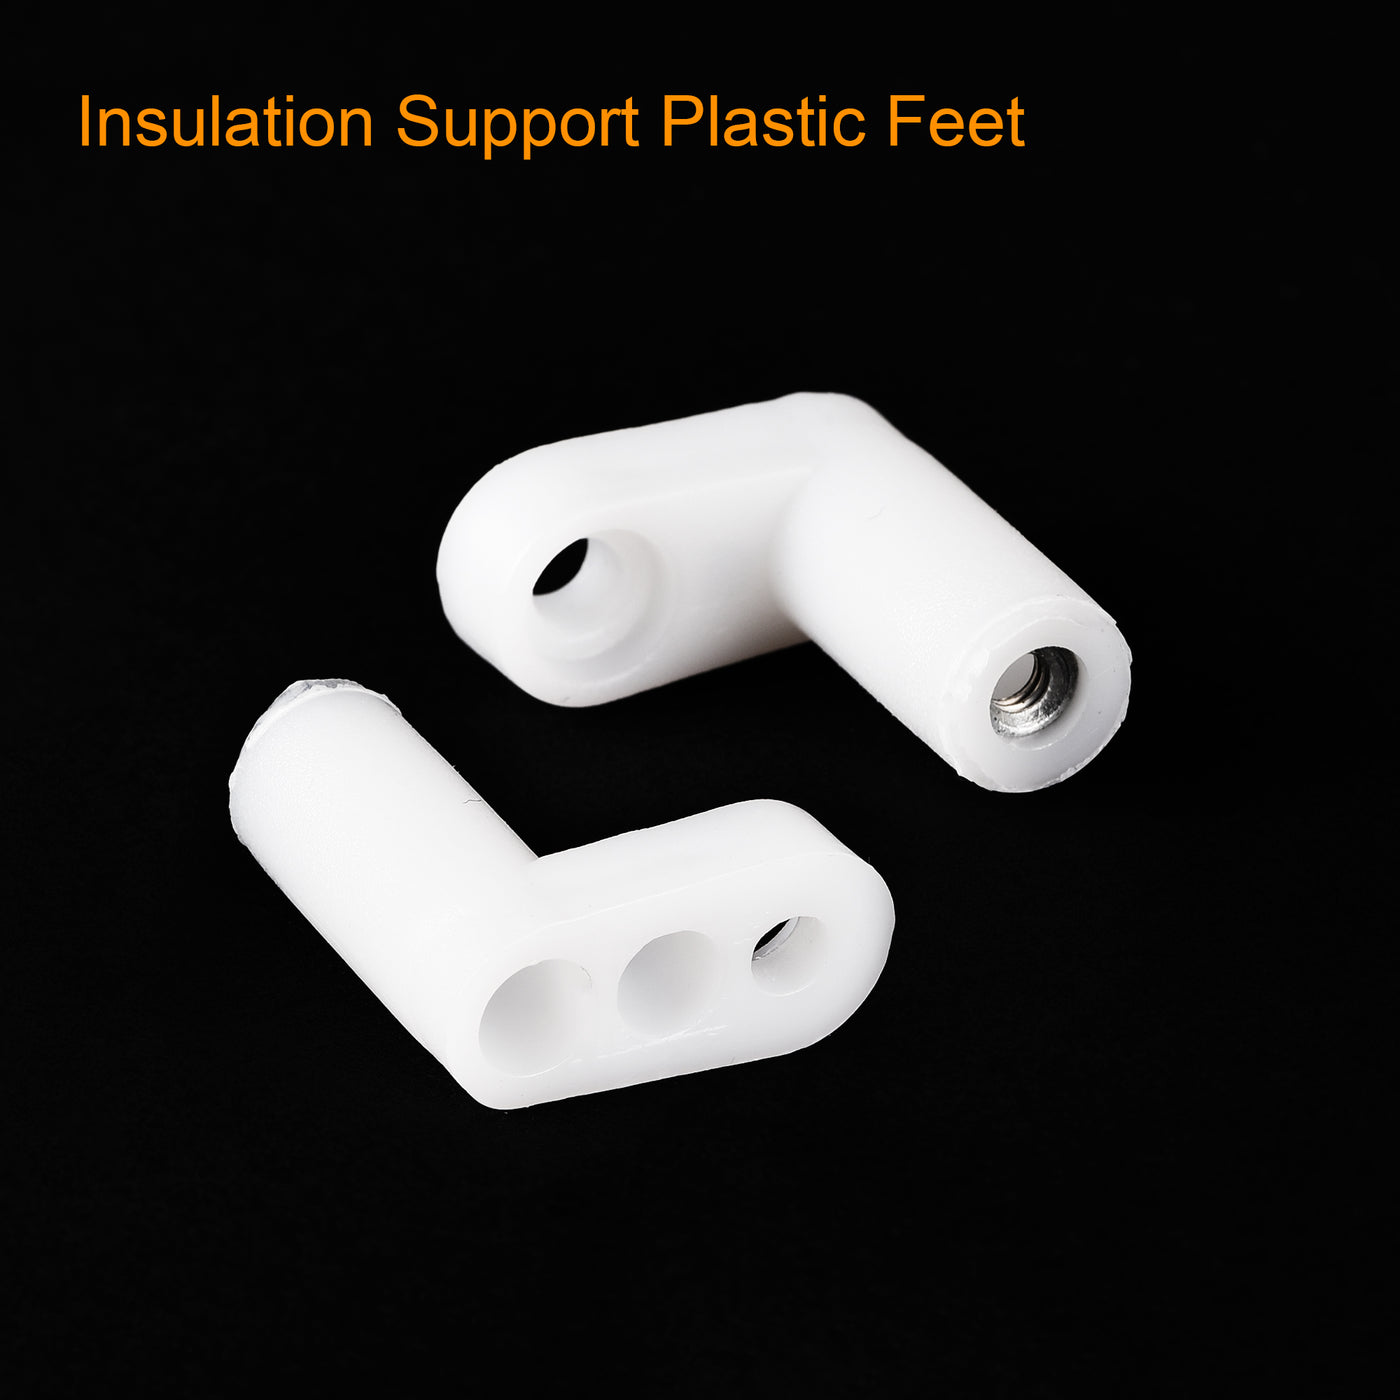 uxcell Uxcell 80Pcs Circuit Board PCB Spacers L Shape Insulated Plastic Fixed Mounting Feet 0.8'' Supporting Height with M3 Screw